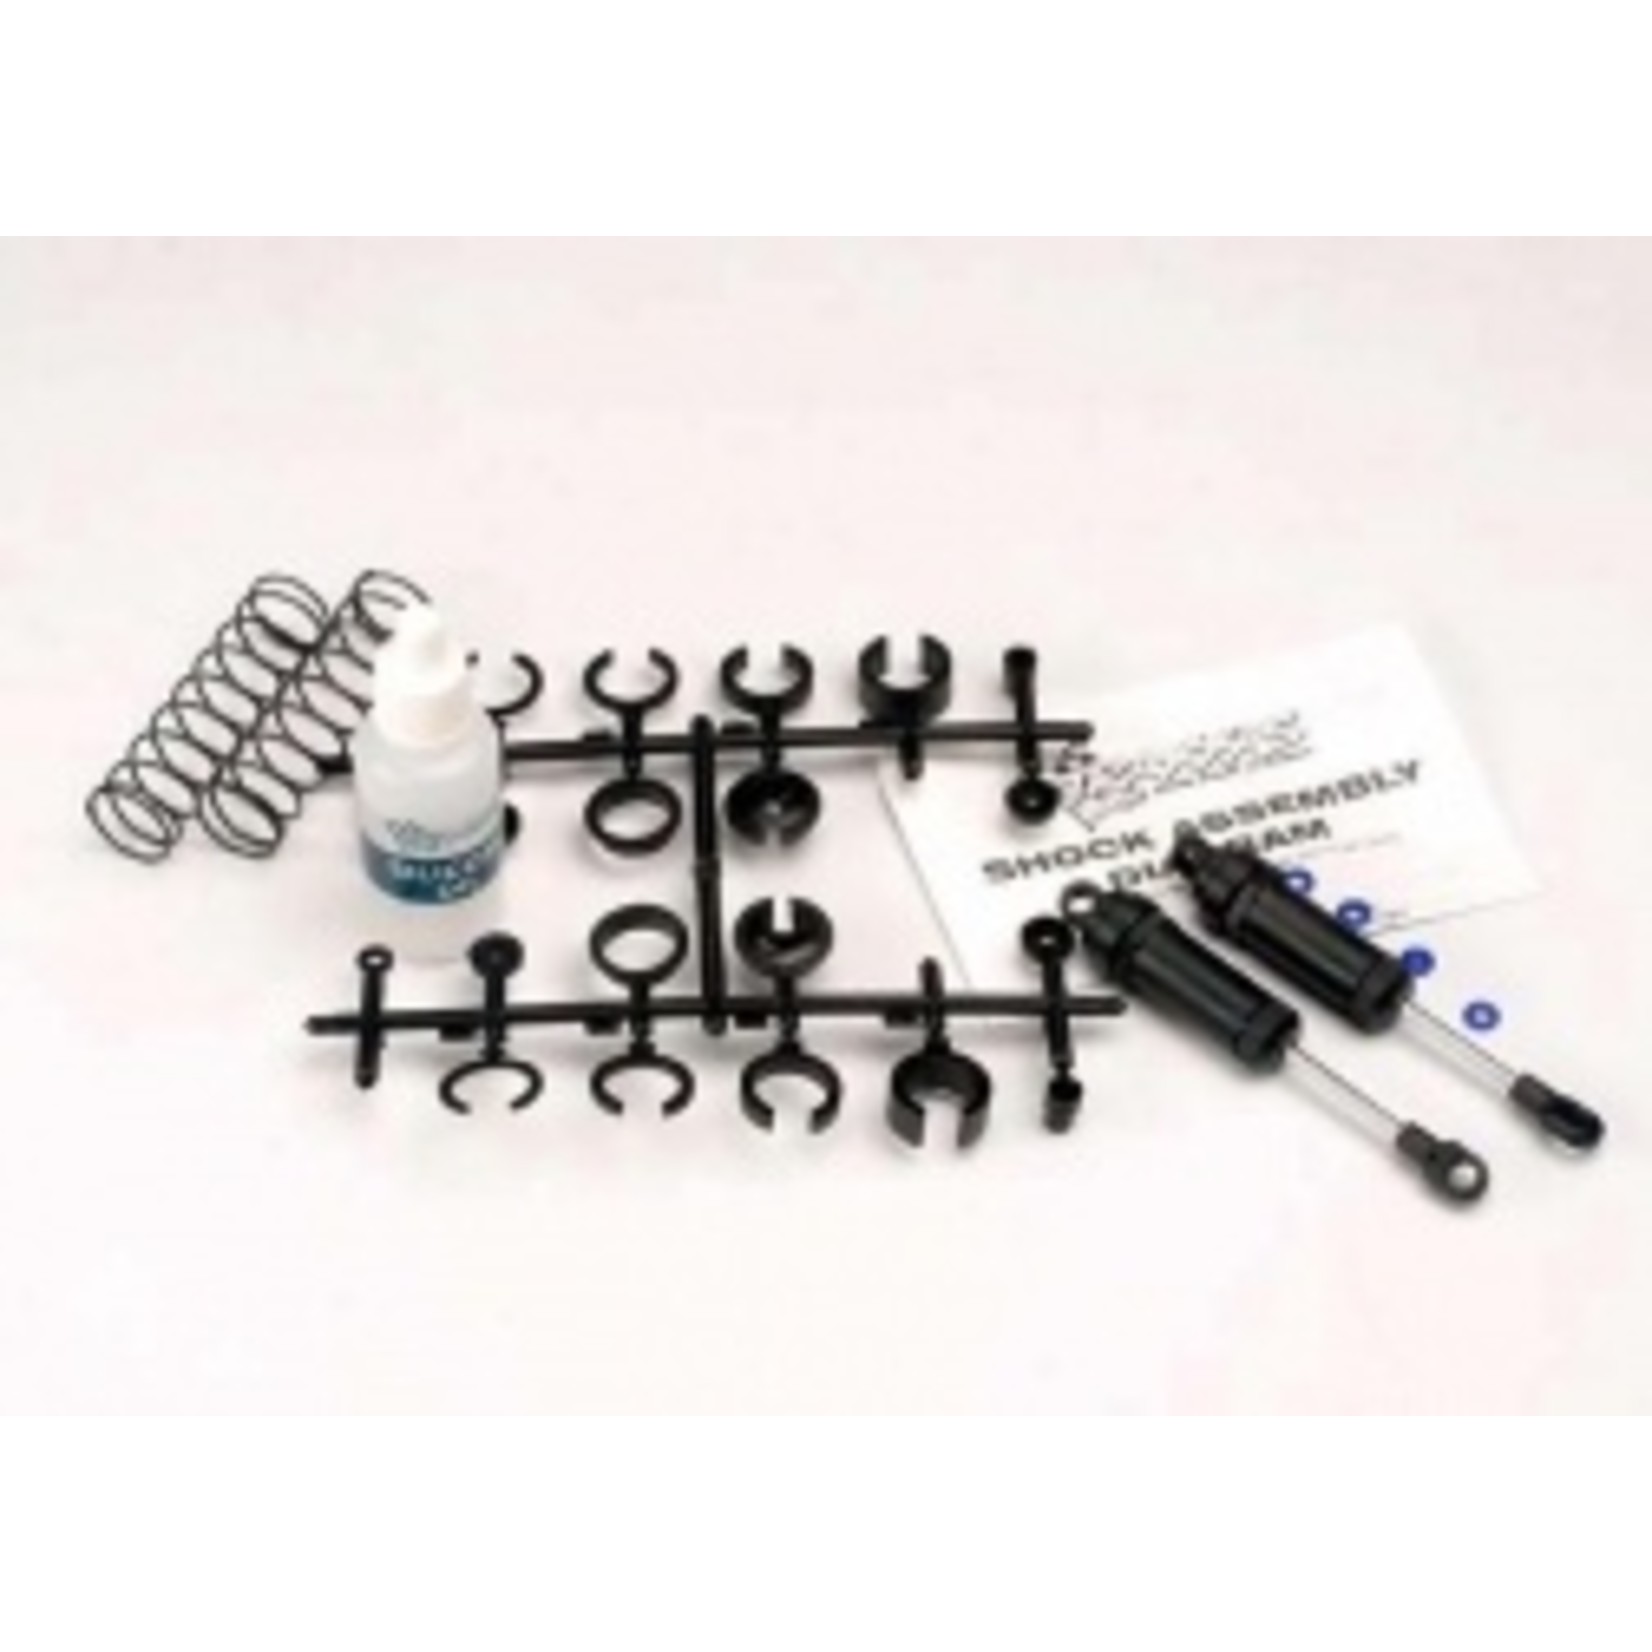 Traxxas Ultra Shocks (black) (long) (complete w/ spring pre-load spacers & springs) (front) (2)